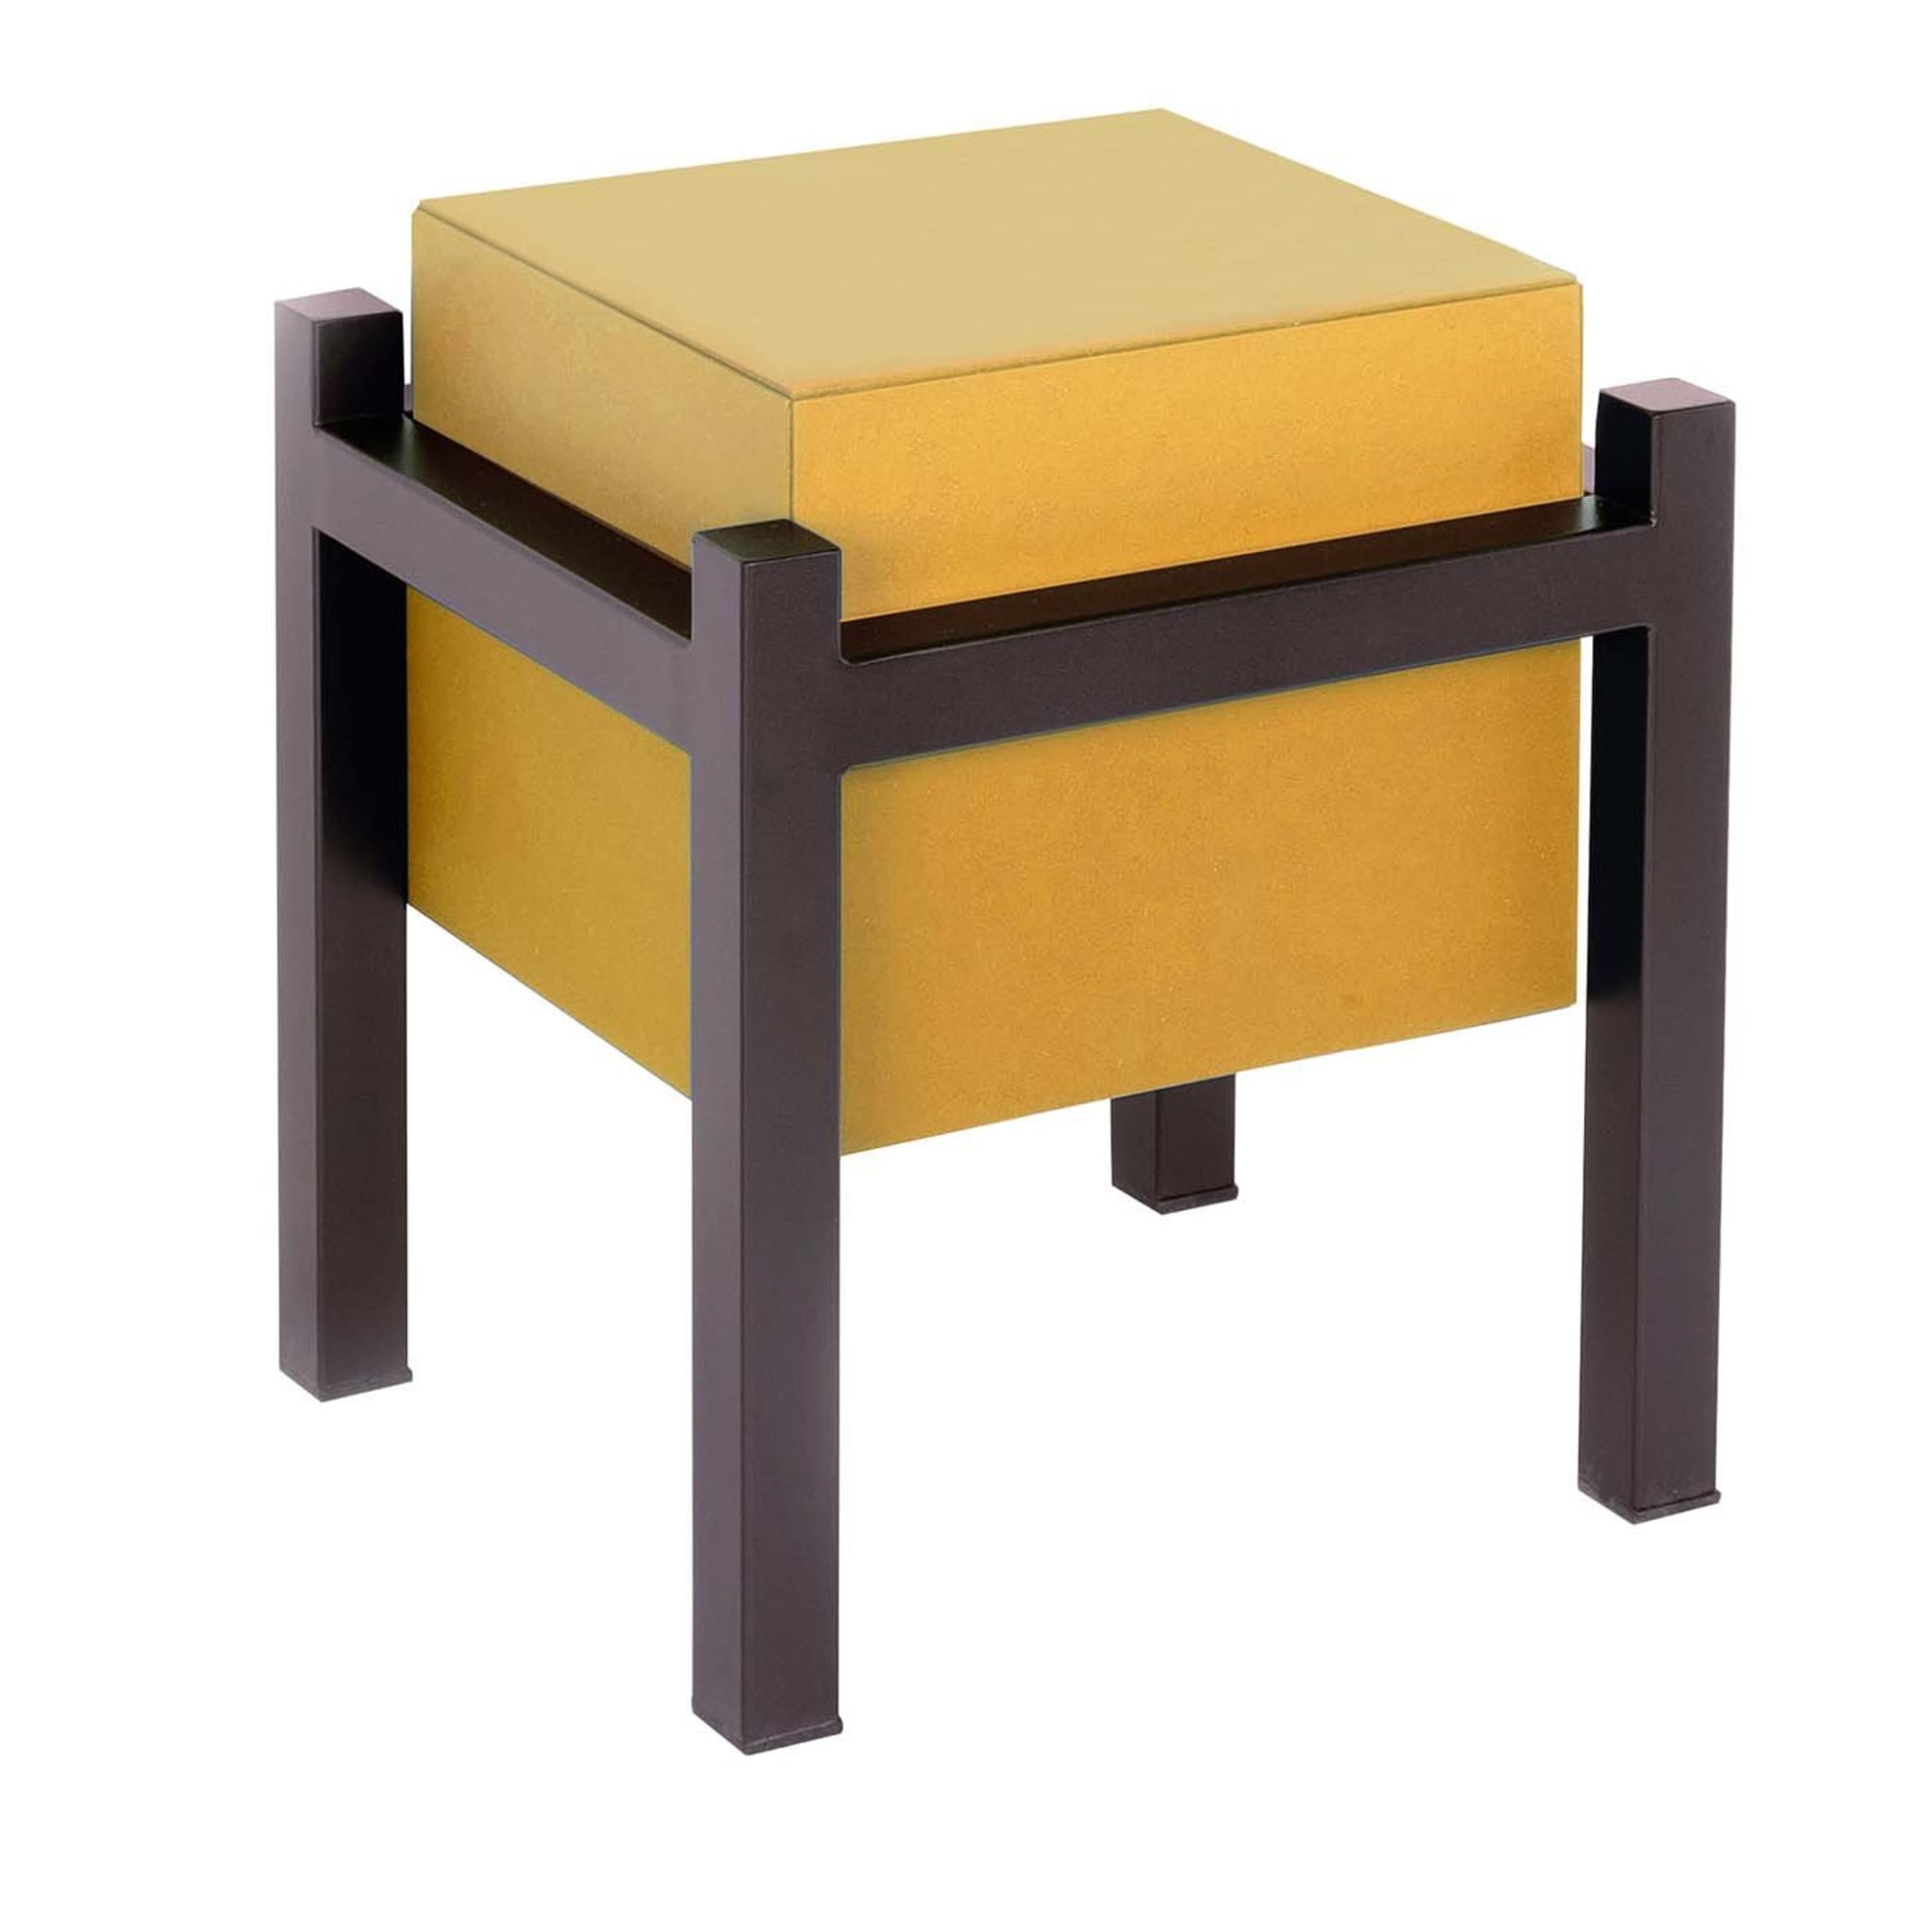 Palafitta Bedside Table Yellow by Studio14 - Main view